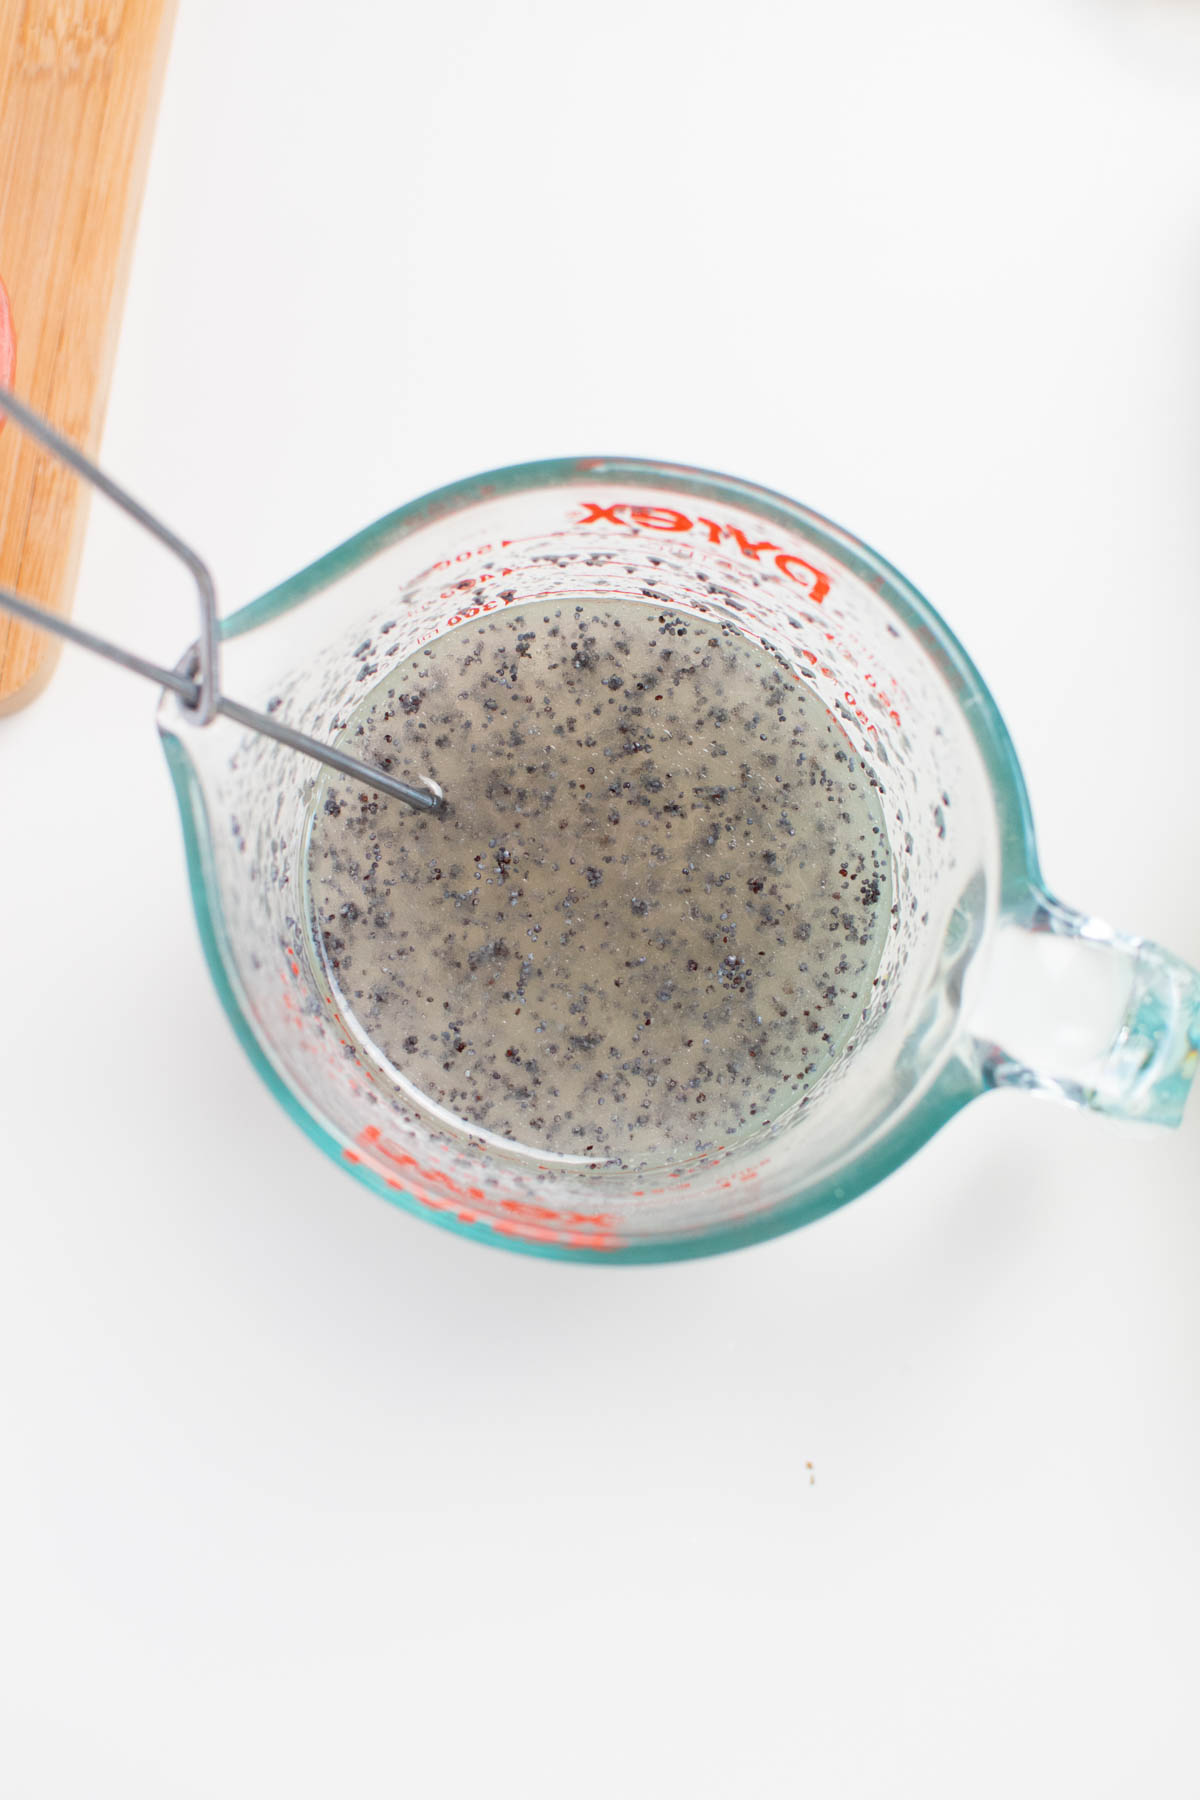 Homemade poppy seed dressing in glass measuring cup with whisk in dressing.